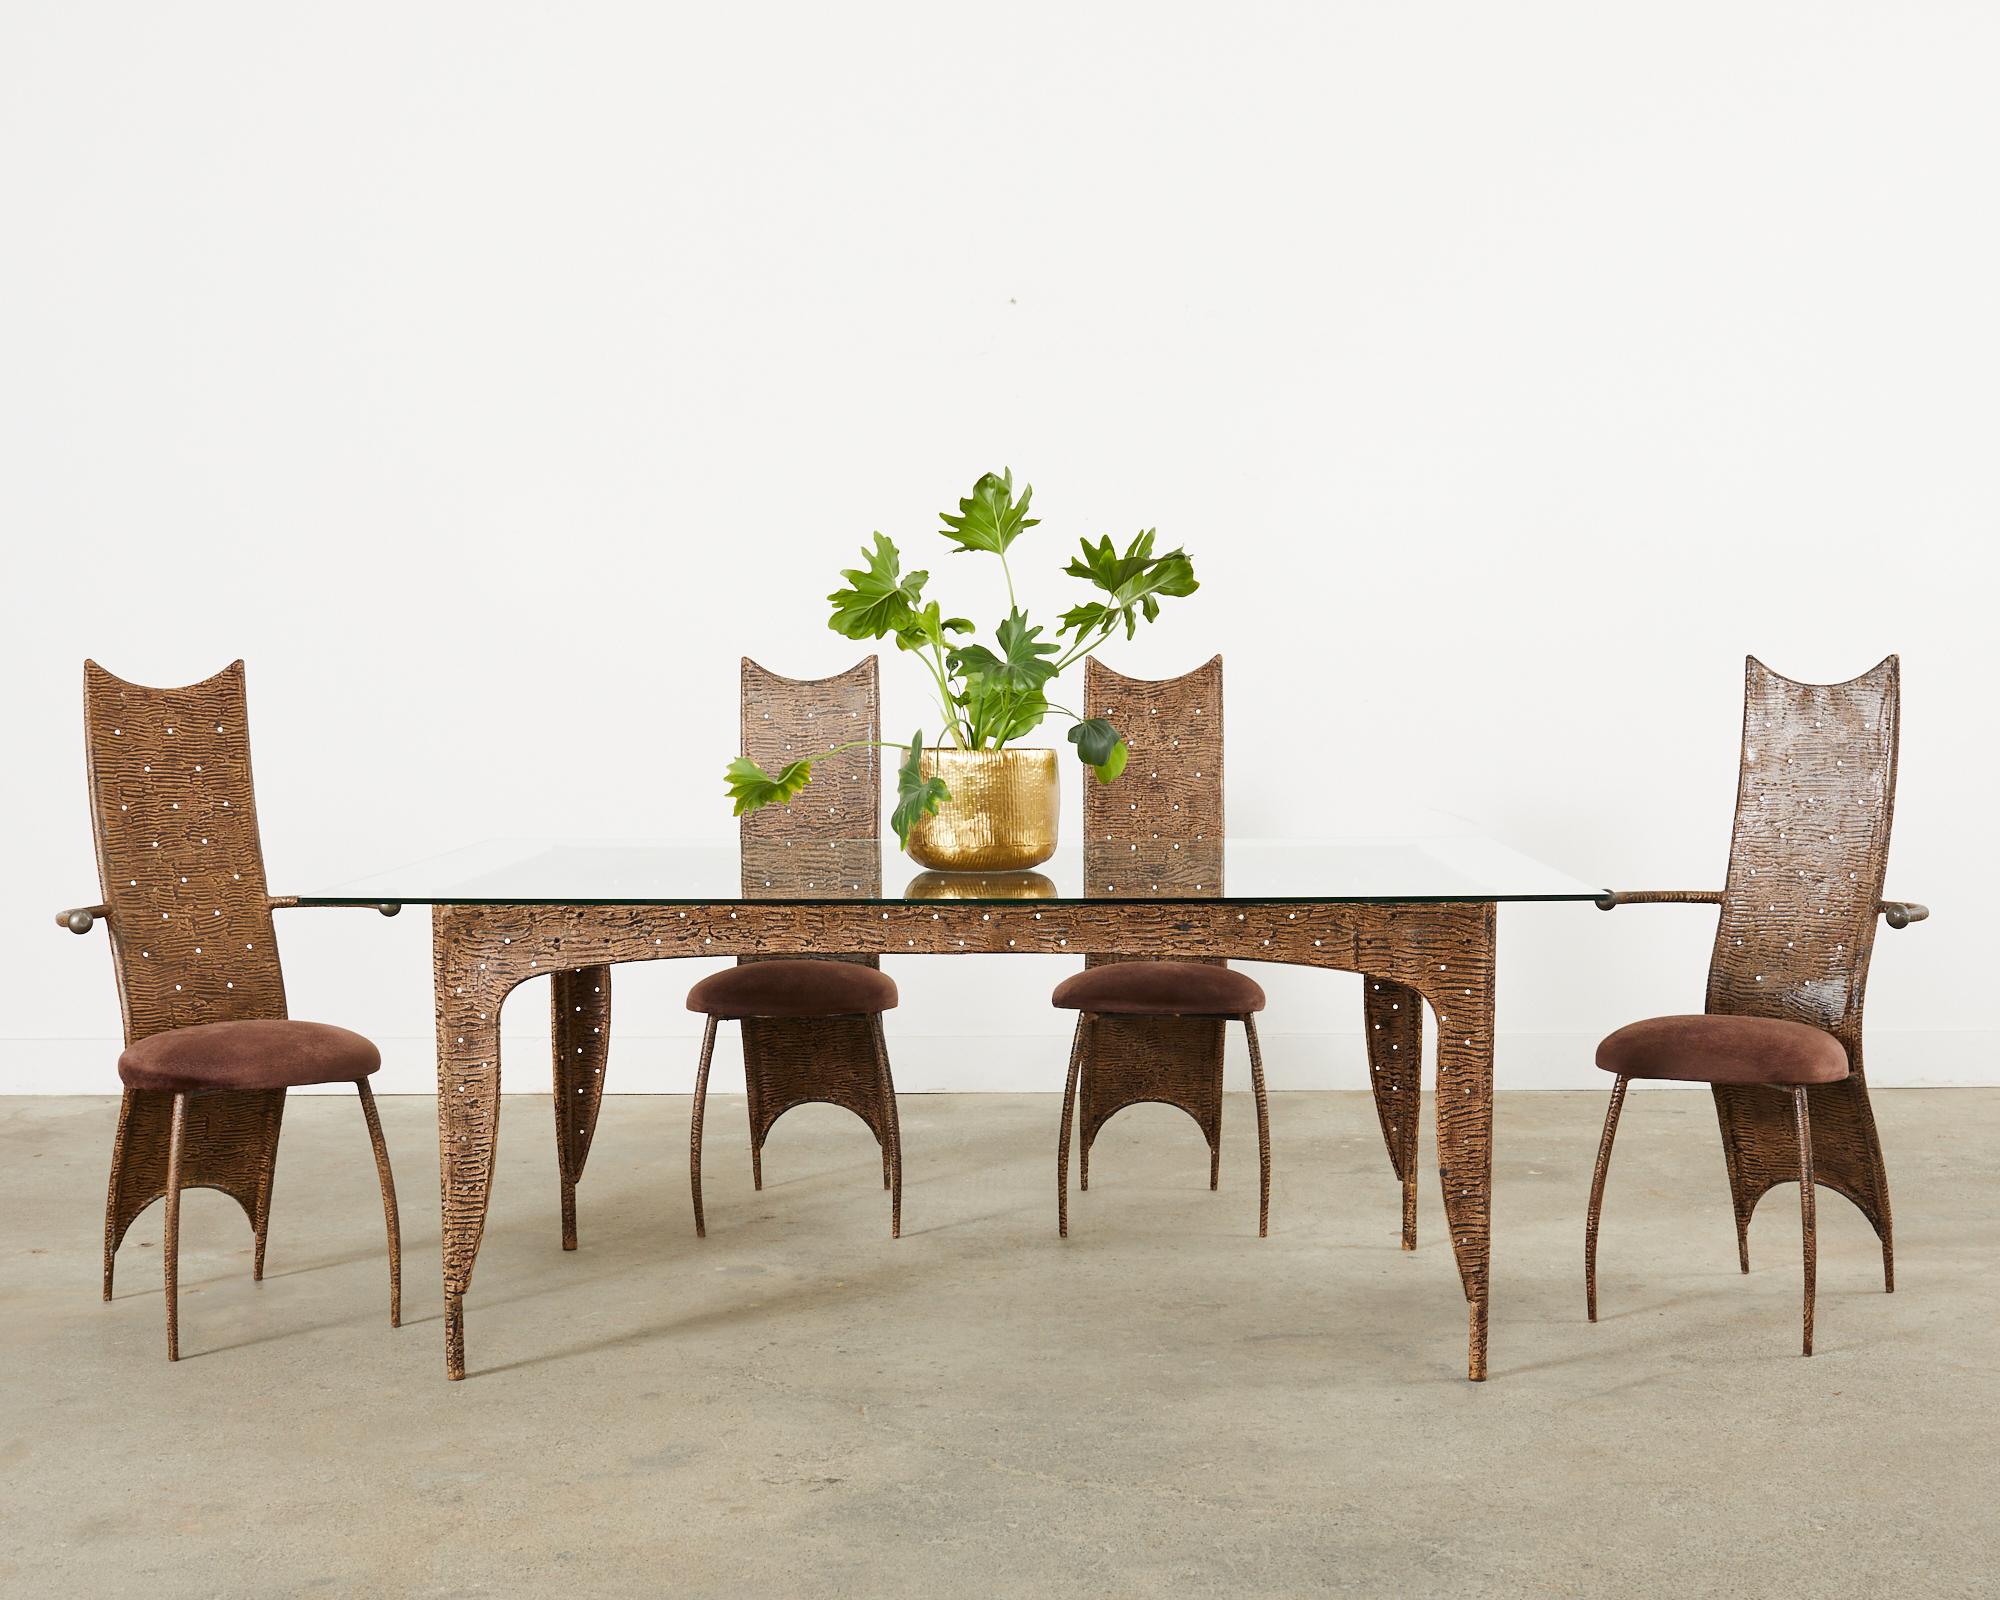 Amazing post-modern steel dining table featuring an applied textured finish that resembles patinated rebar. The table has a smooth texture with a pierced metal apron around all four sides having small holes perforated in the finish. The design has a